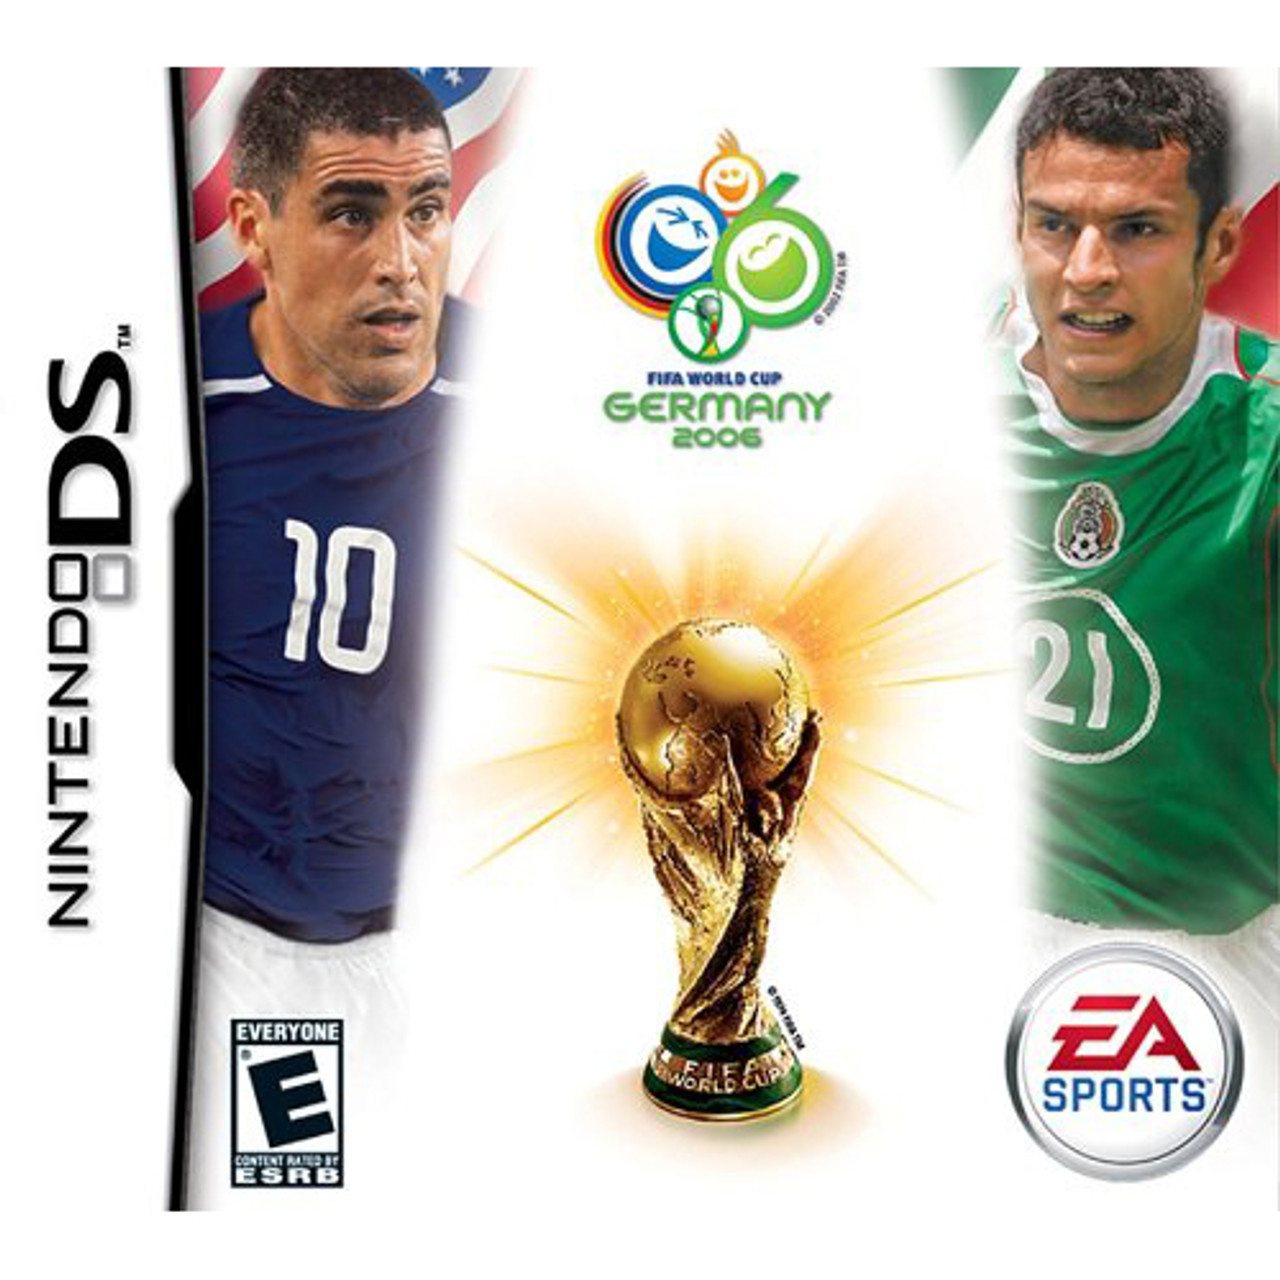 2006 FIFA World Cup Nintendo DS Game For Sale DKOldies